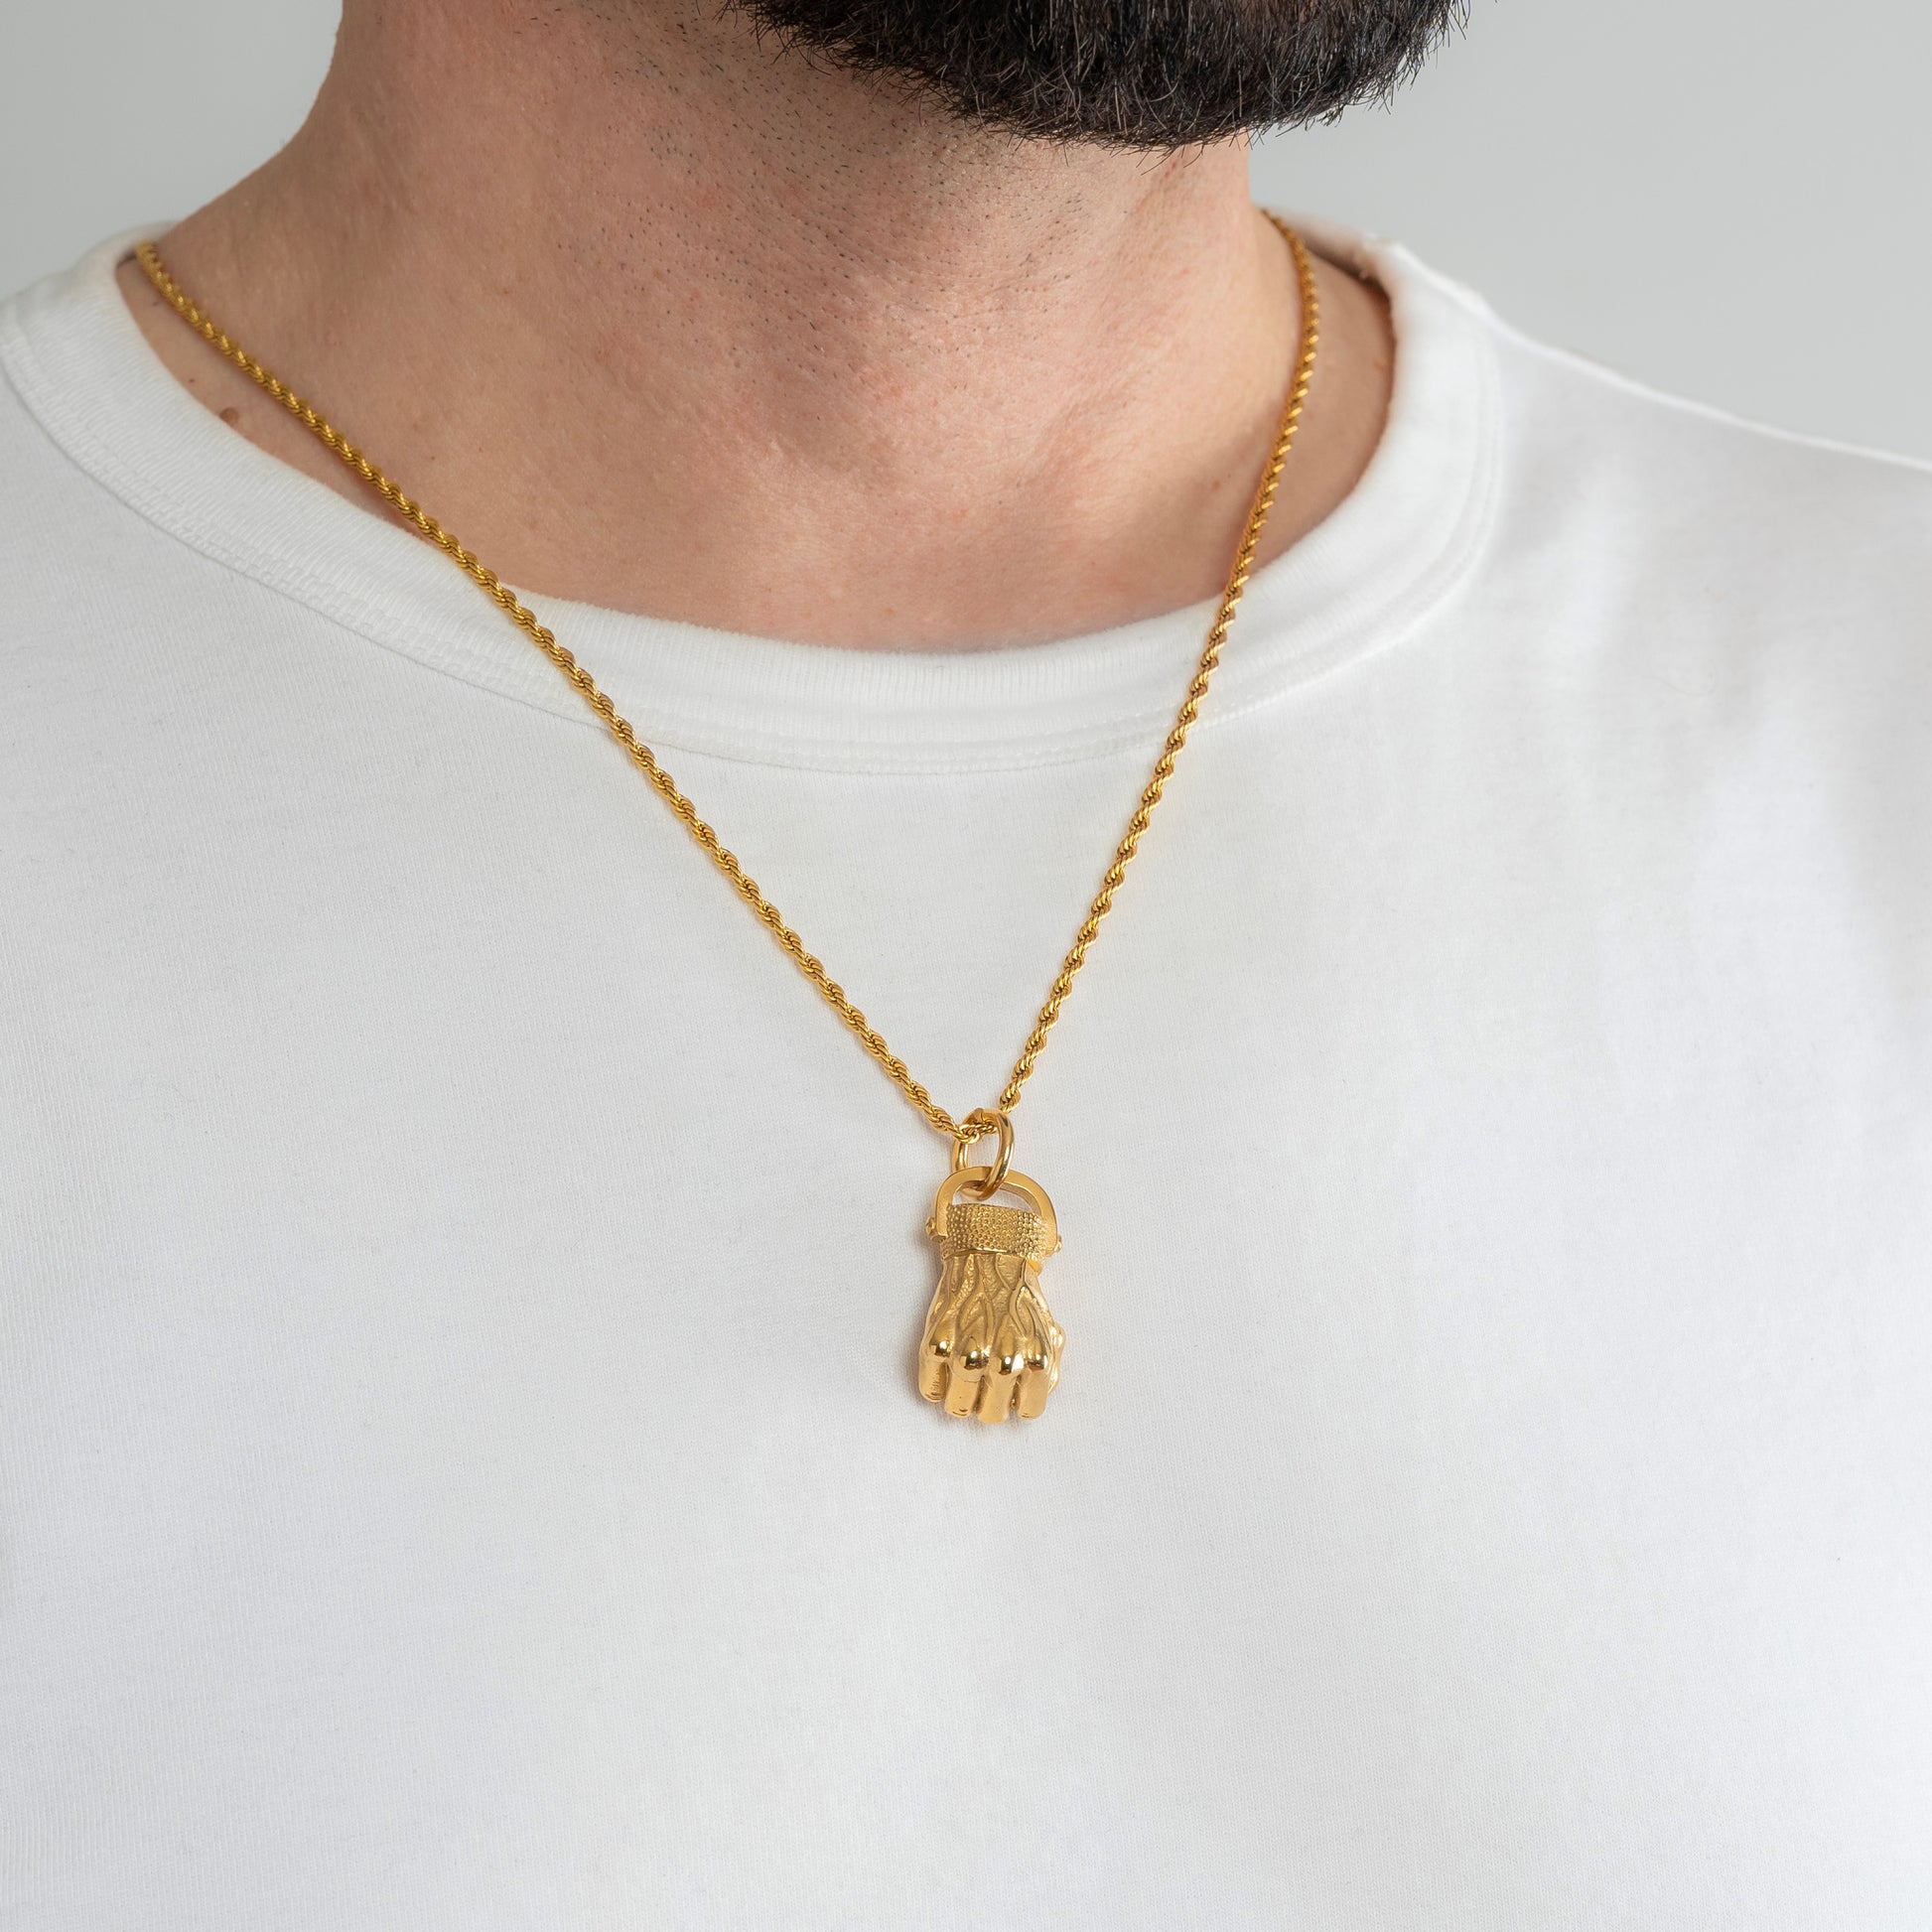 A male model in a white t-shirt wearing a Fist Gold Pendant with a Gold Rope chain 22 inches. Close-up image of the non-tarnish powerful men's necklace.